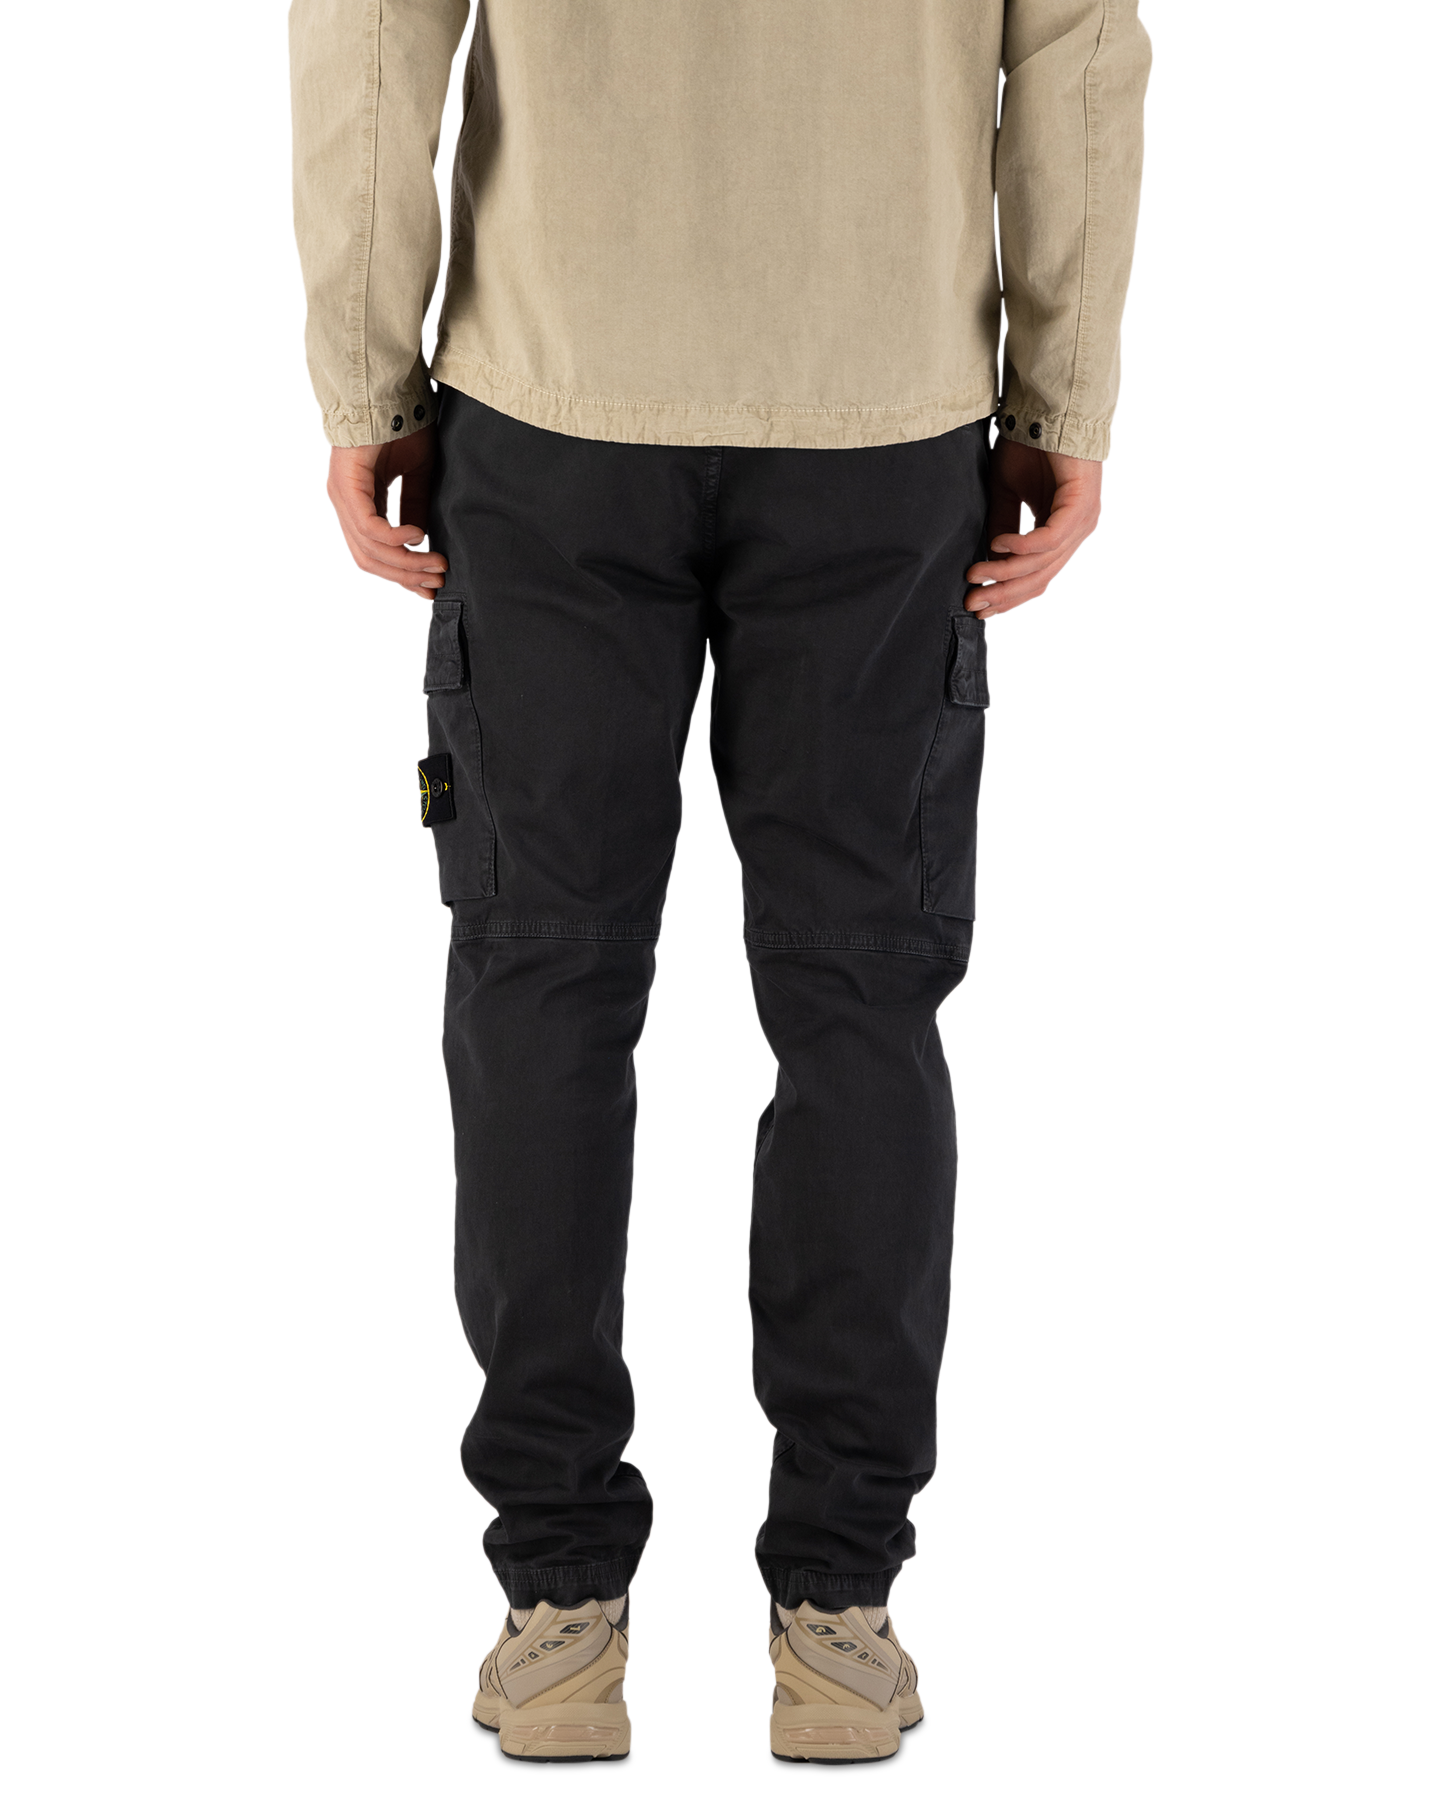 Stone Island 30404 Organic Cotton Stretch Broken Twill Garment Dyed 'Old' Effect Regular Tapered Cargo Pants DONKERGRIJS 5